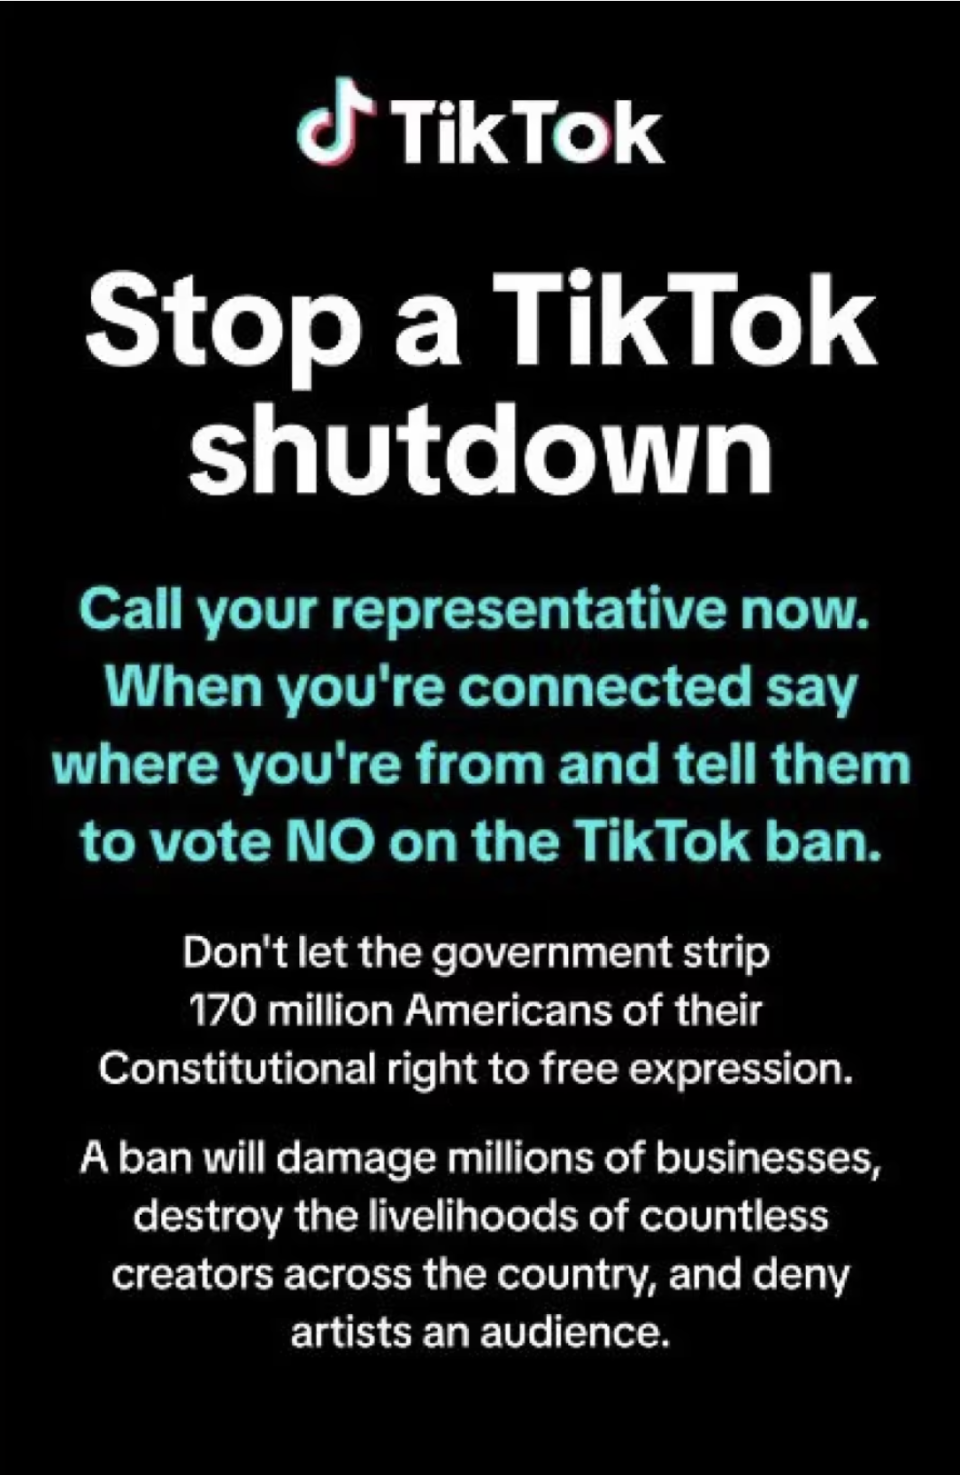 U.S. lawmakers were deluged with messages earlier this month after TikTok sent this note to its U.S. users. Several lawmakers said it made them angry, calling it dishonest and noting that it proved their concerns about the foreign company's influence in the U.S. (CBC)